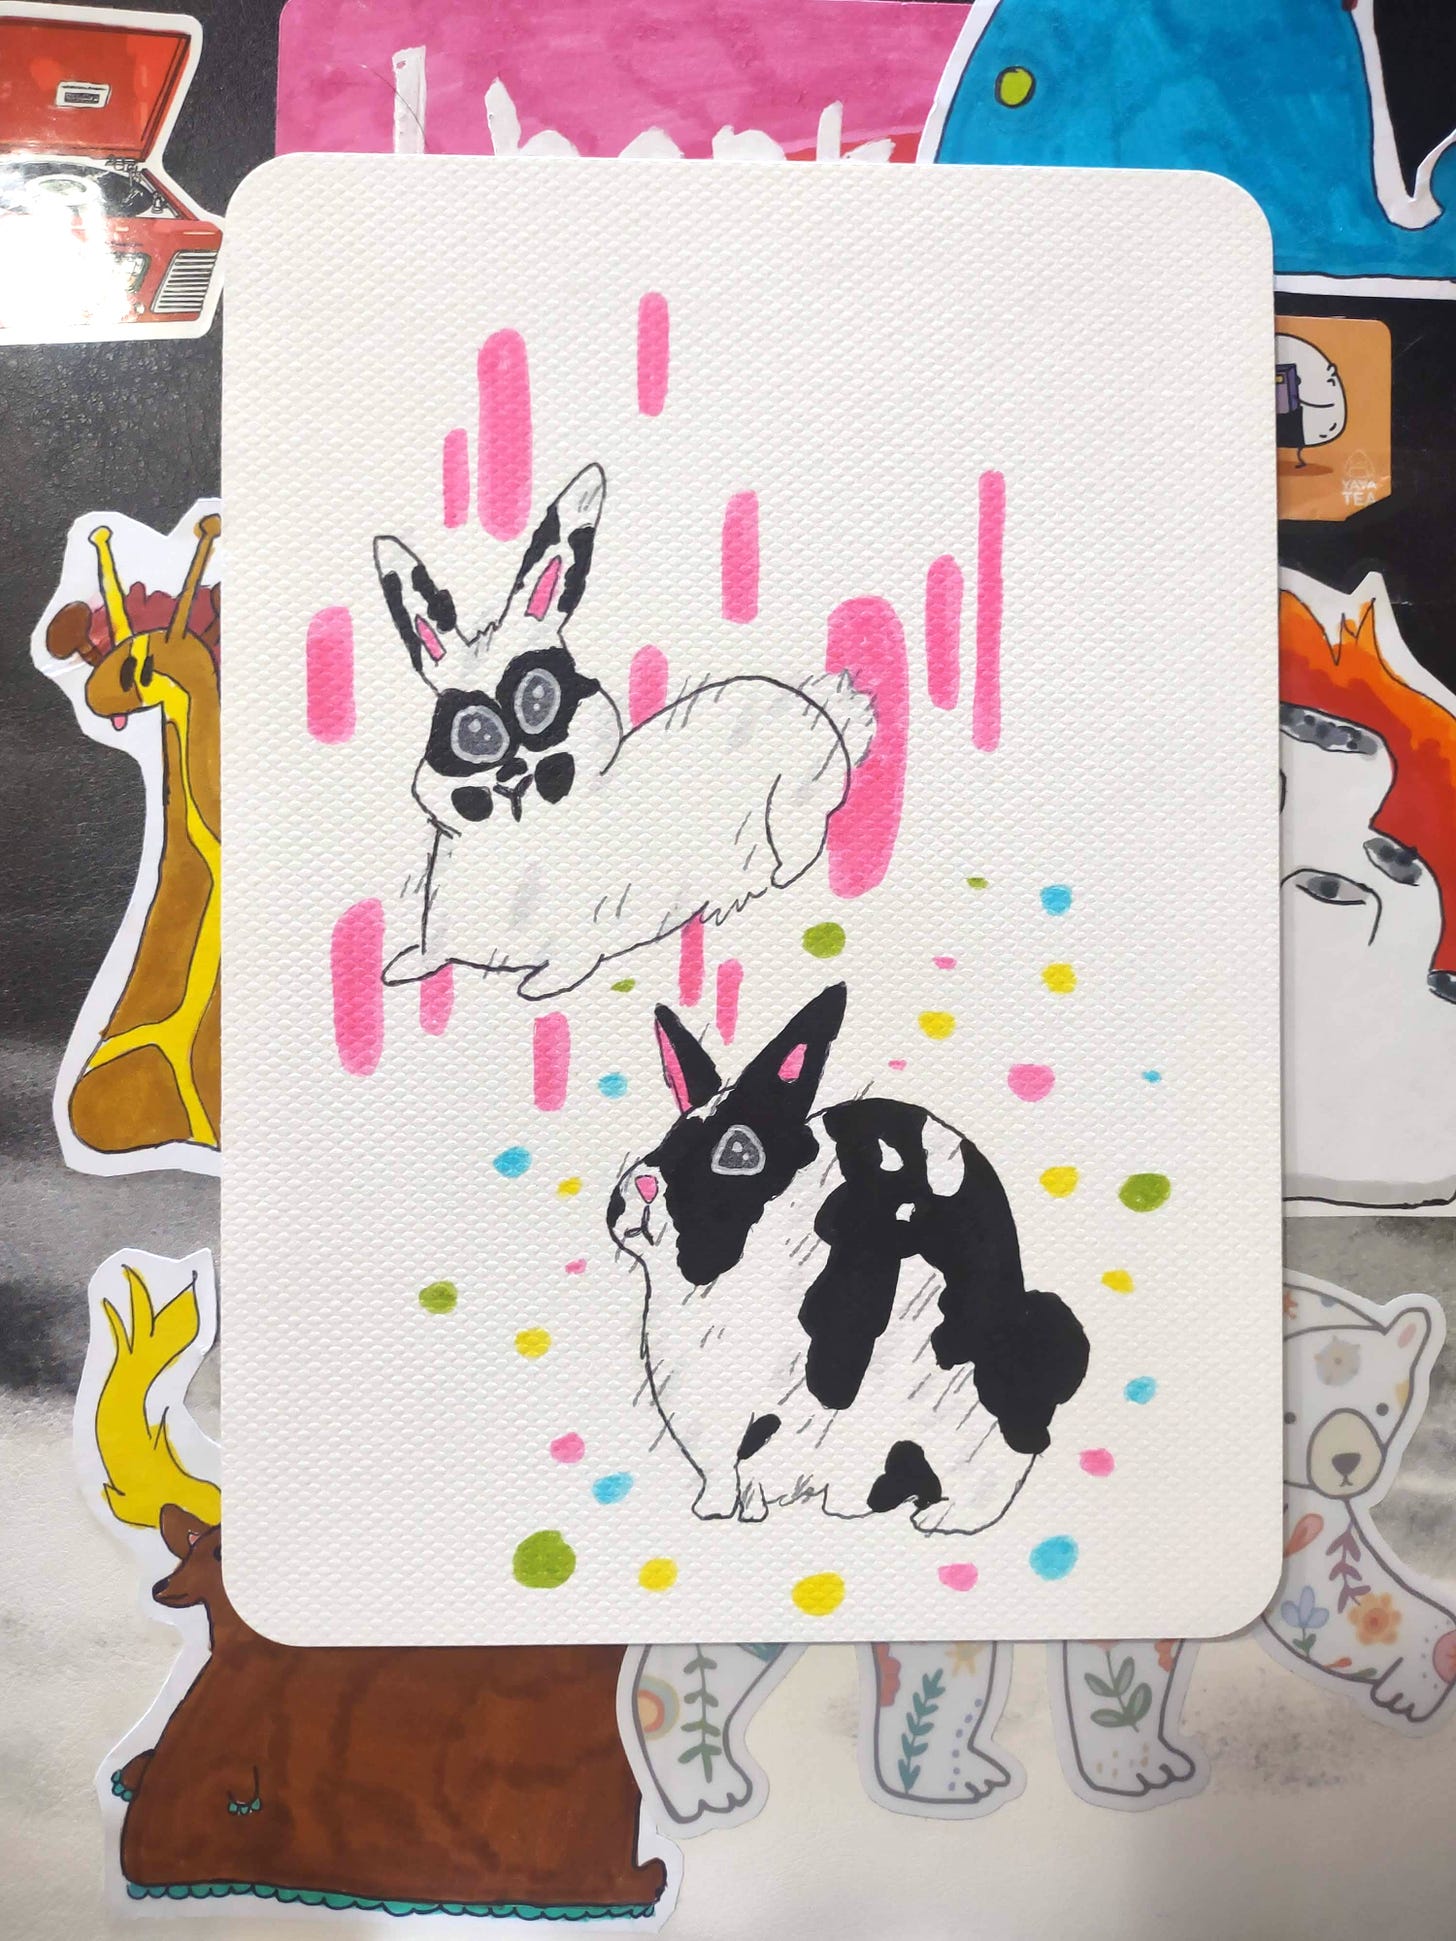 A cartoony illustration of two black and white bunnies with stickers of other illustrated animals in the background.